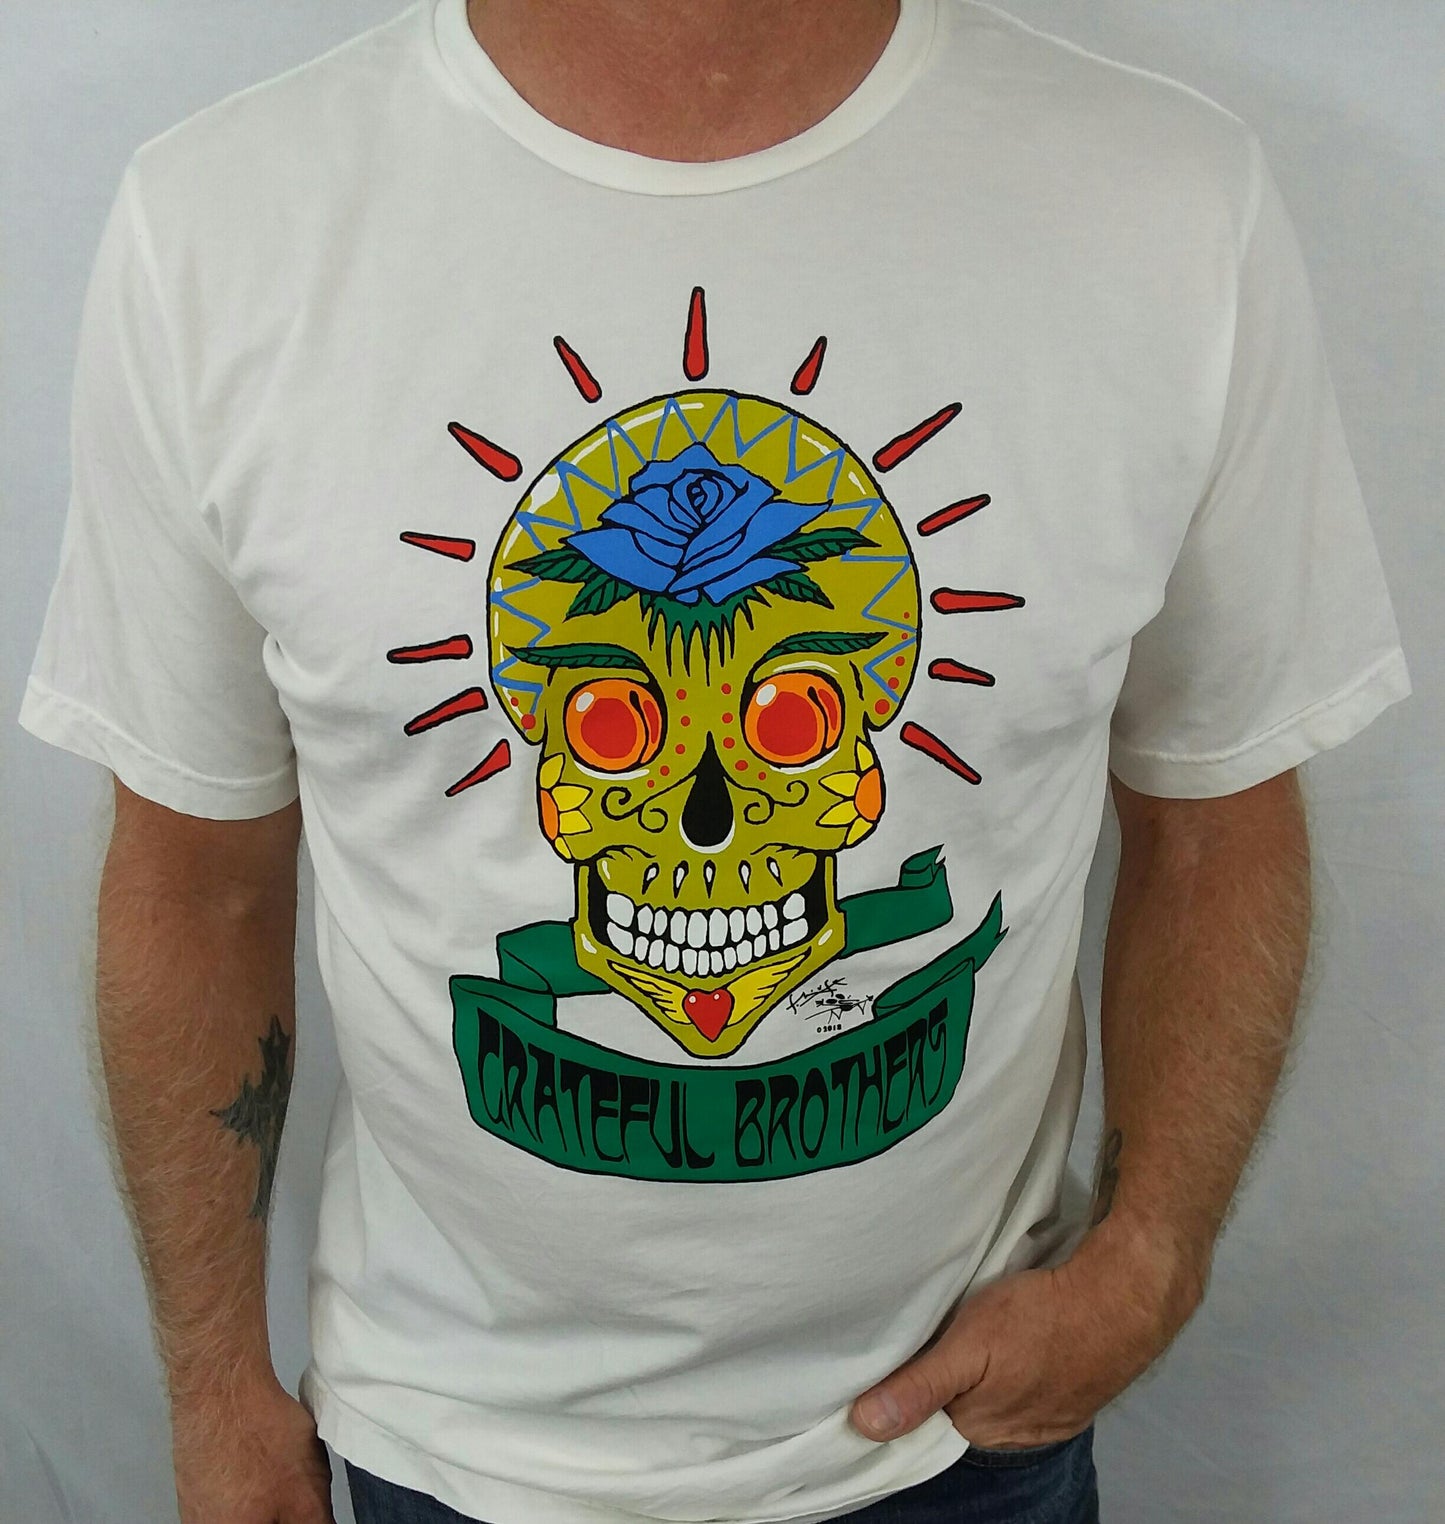 The Grateful Brothers white skull t-shirt on model designed by stanley mouse 100% organic made in america blue rose music